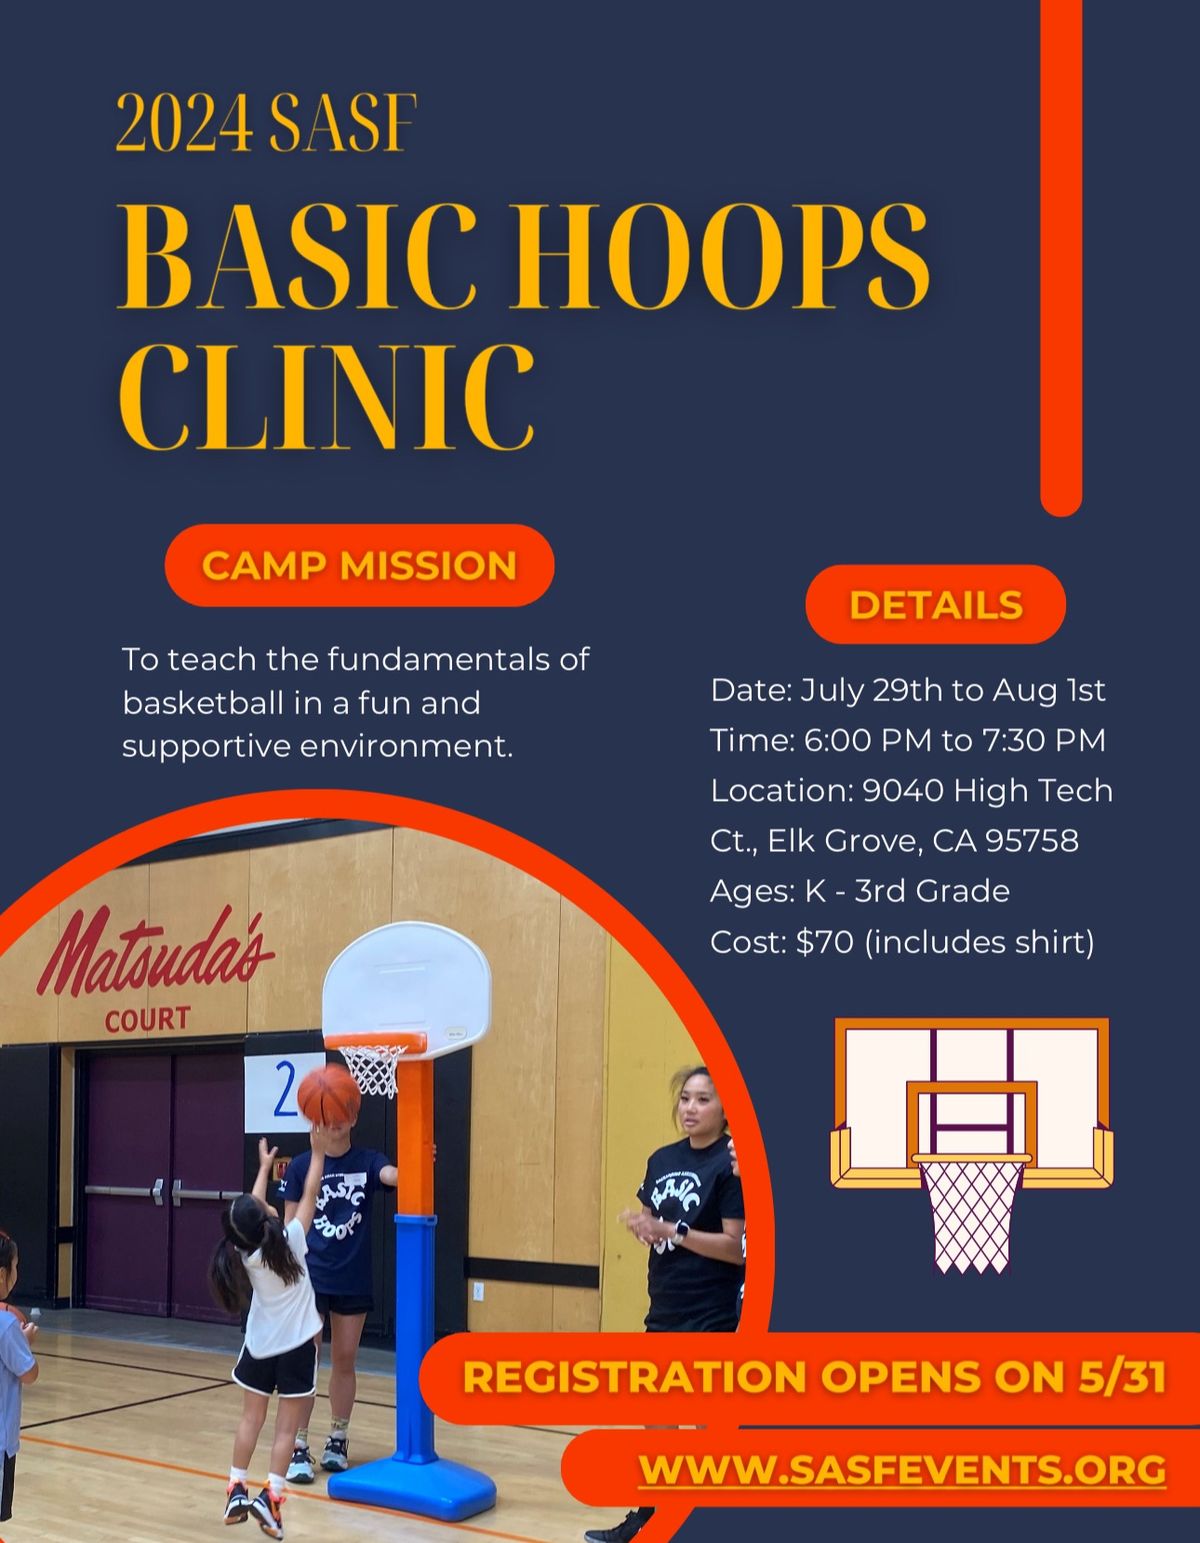 2024 SASF Basic Hoops Clinic (Sold out! Thank you for support!)